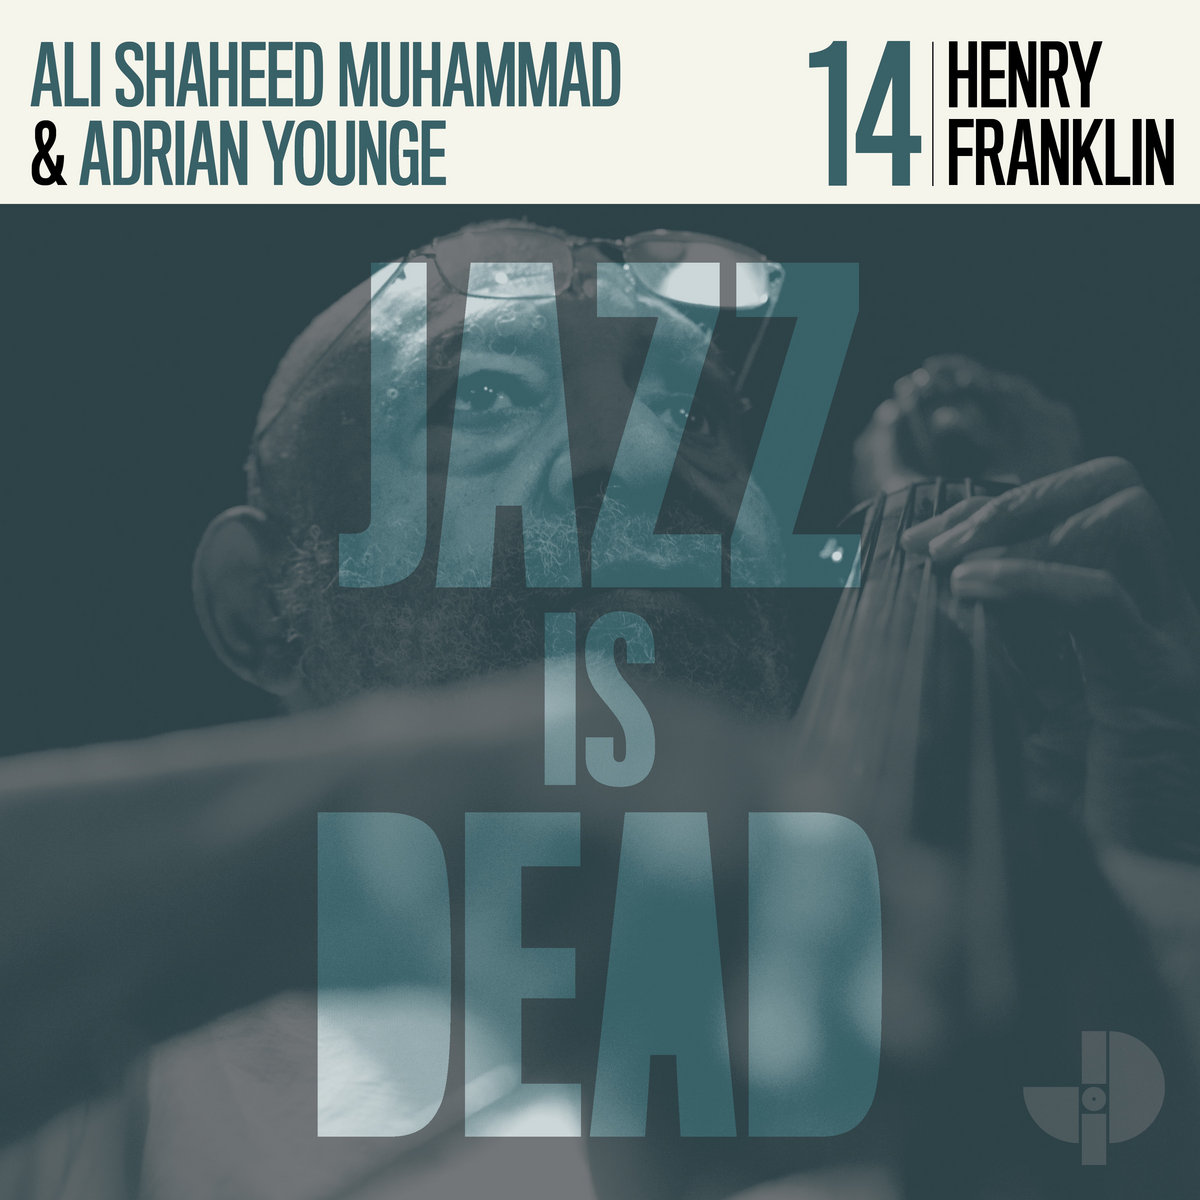 RECORD OF THE WEEK ⭐️ HENRY FRANKLIN, ALI SHAHEED MUHAMMAD, ADRIAN YOUNGE – HENRY FRANKLIN ⭐️